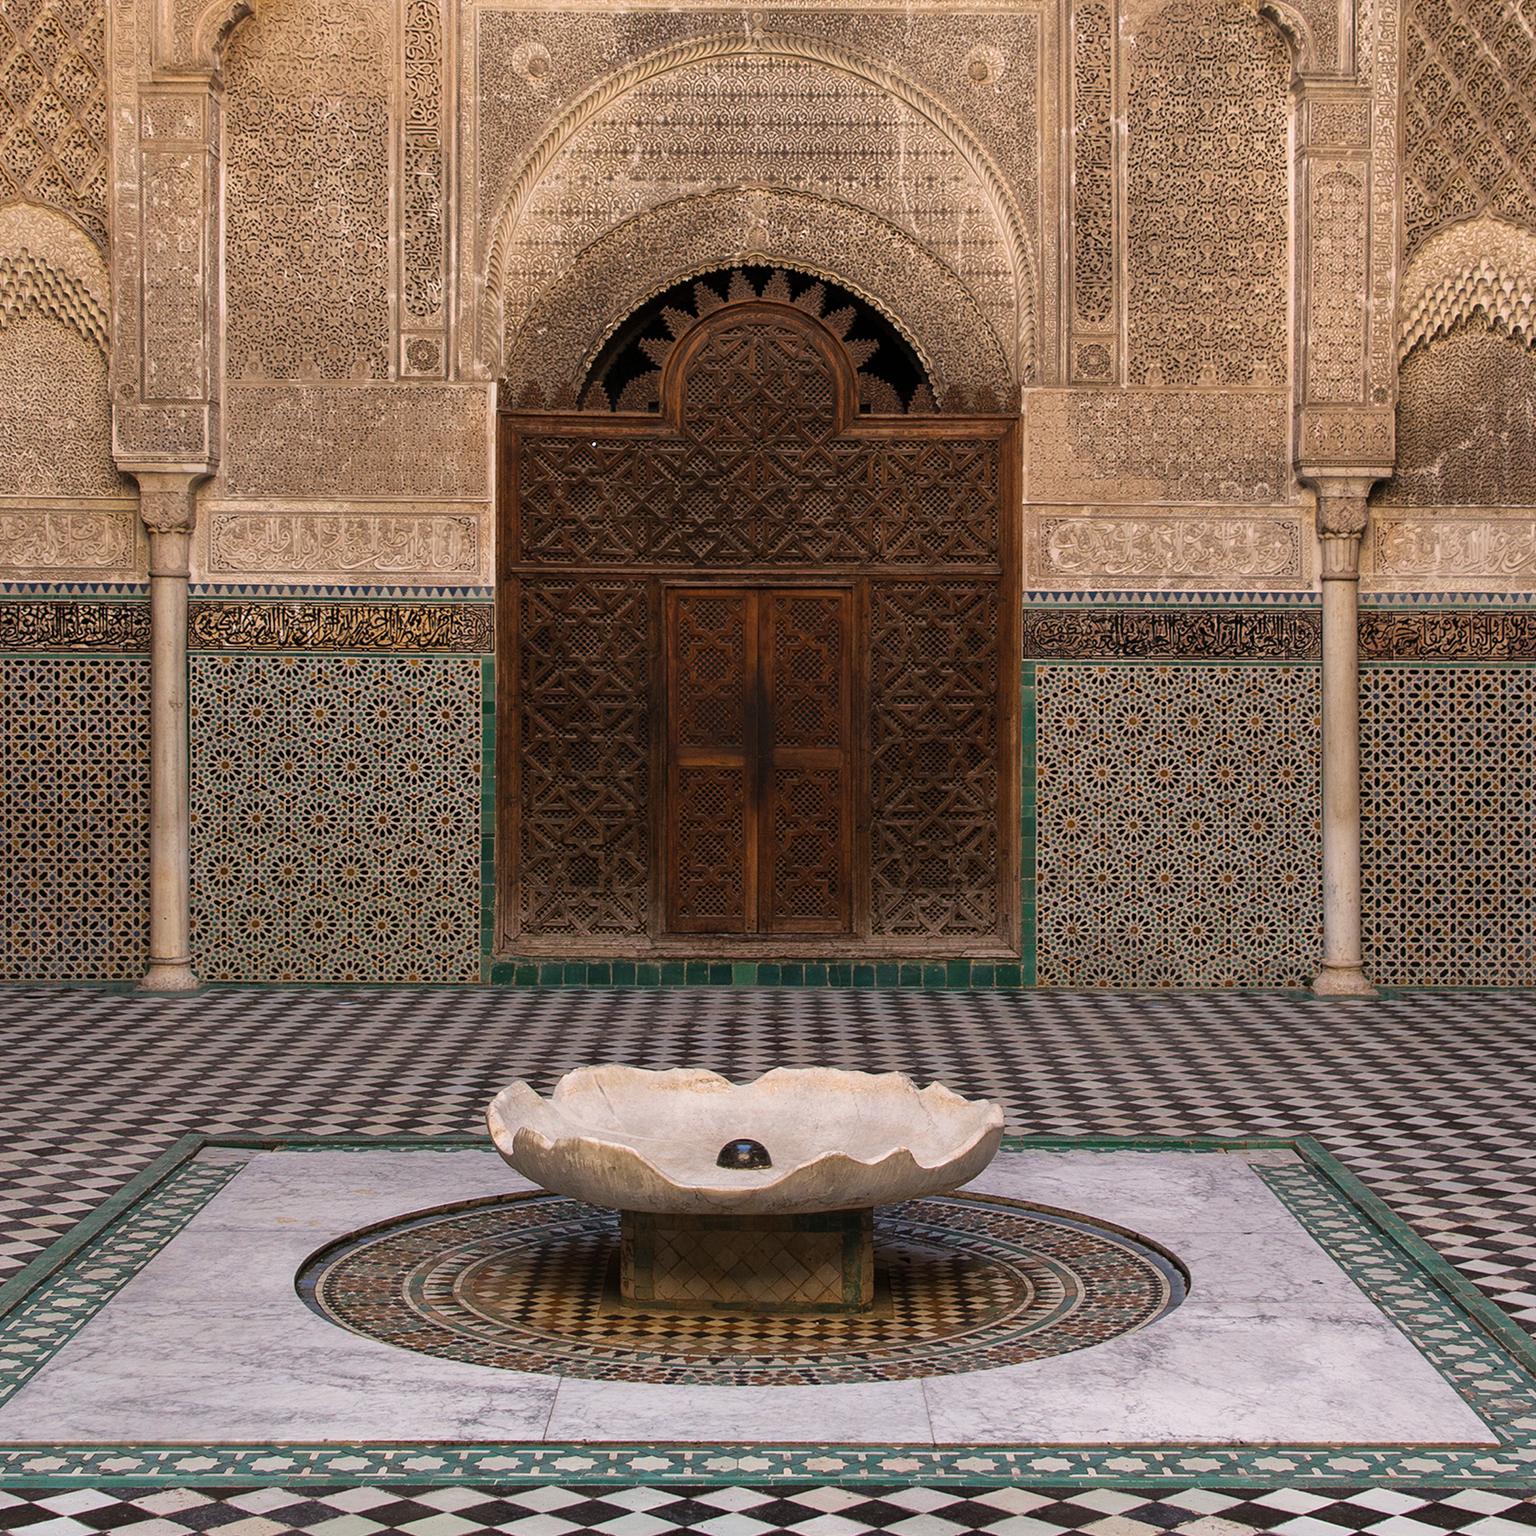 Islamic architectural detail of the Medersa courtyard, Fez, Morocco, 2016 - Photograph by  Cosmo Condina